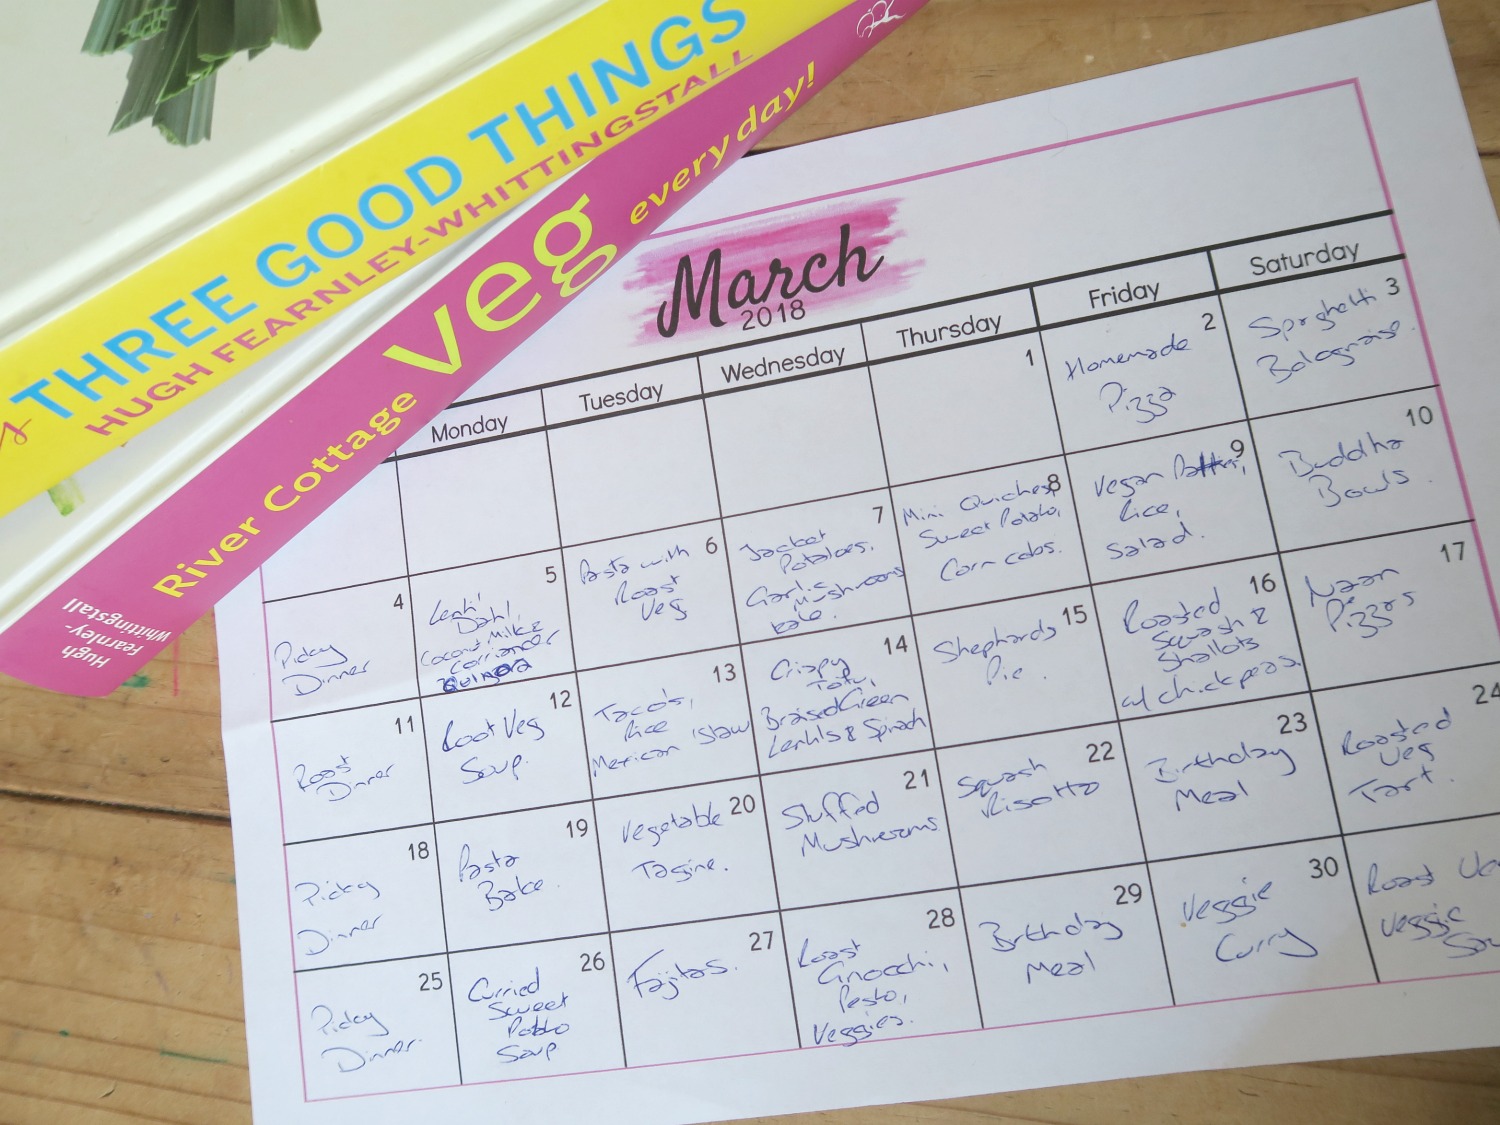 A Family Meal Plan for March